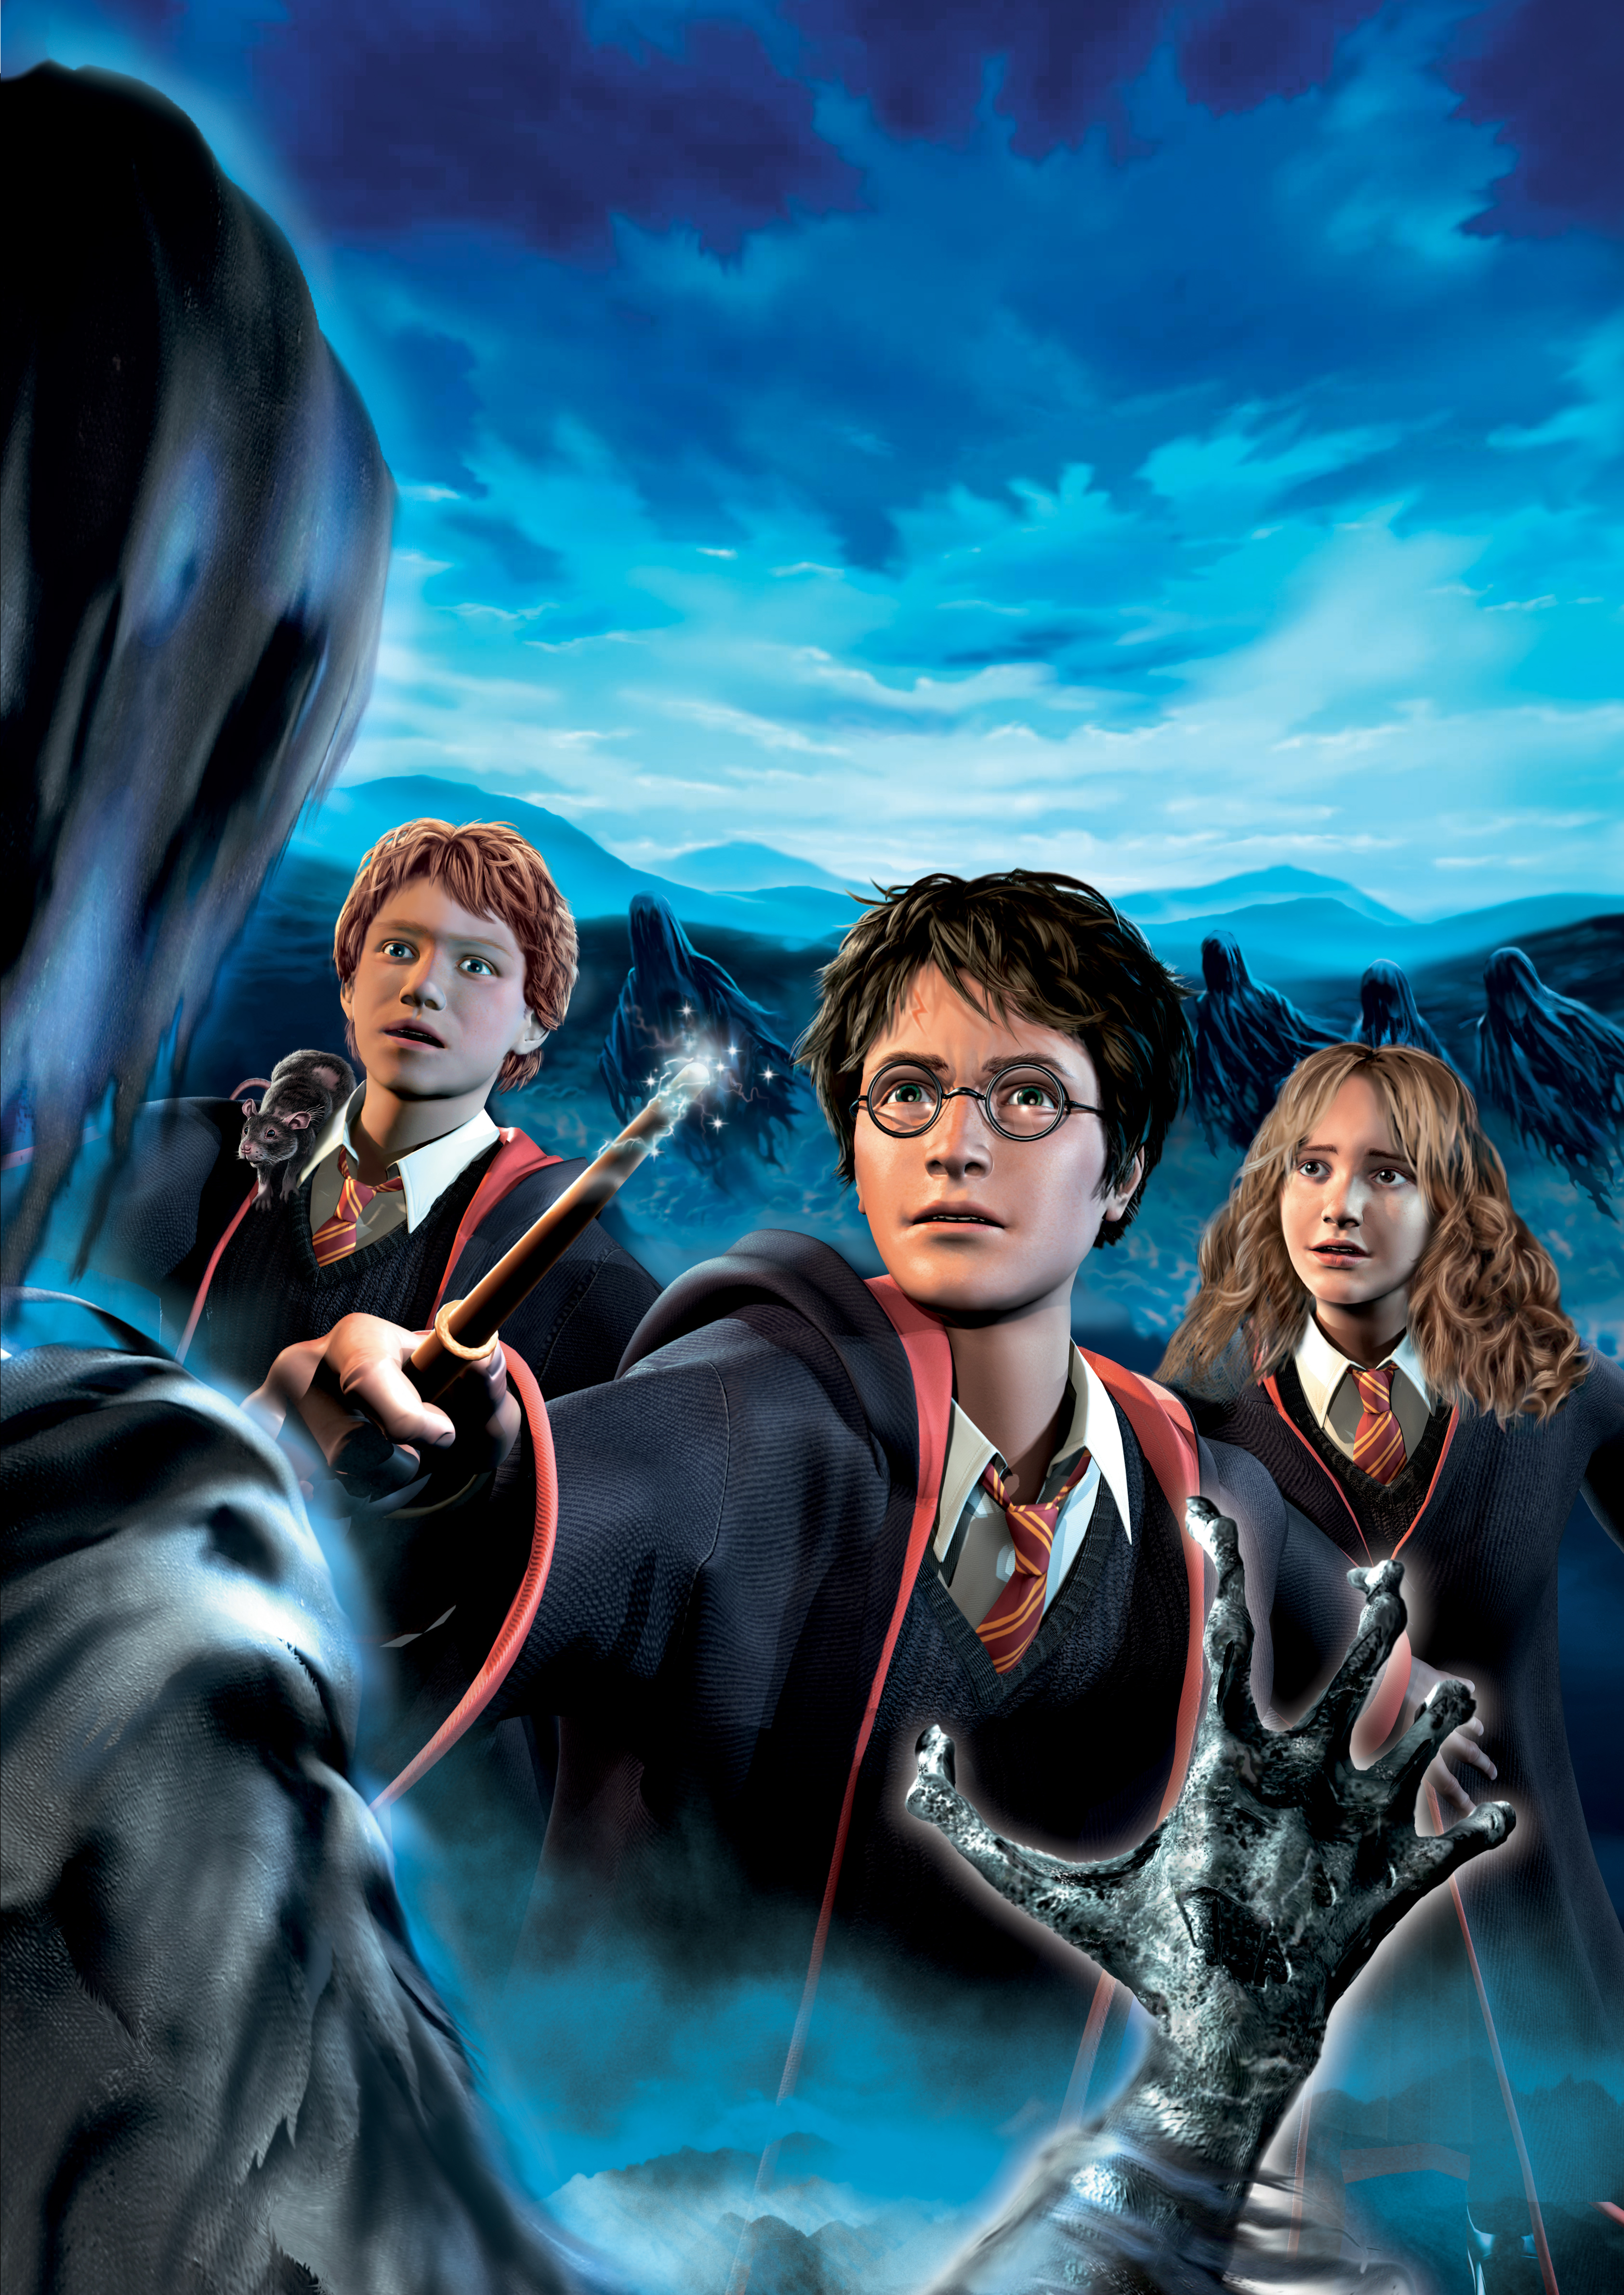 free harry potter games